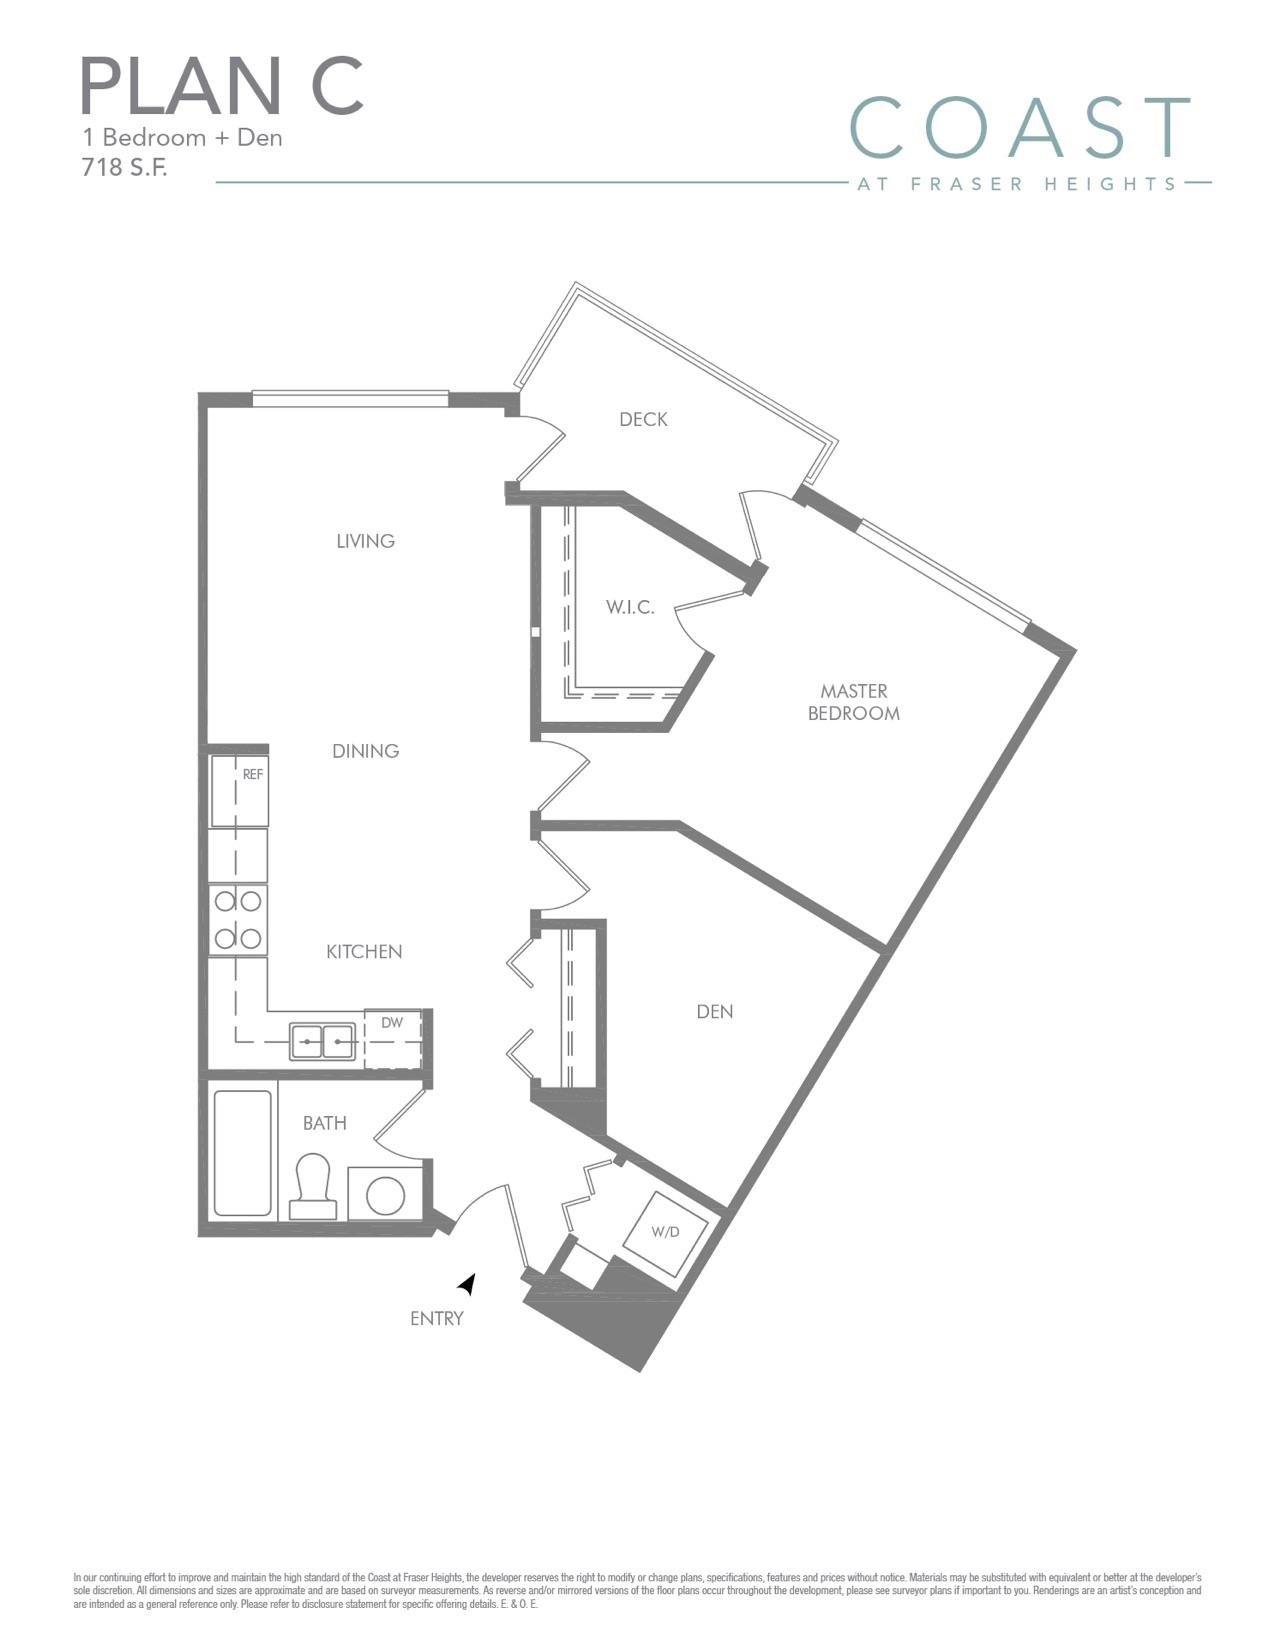 504 Floor Plan of COAST at Fraser Heights Condos with undefined beds